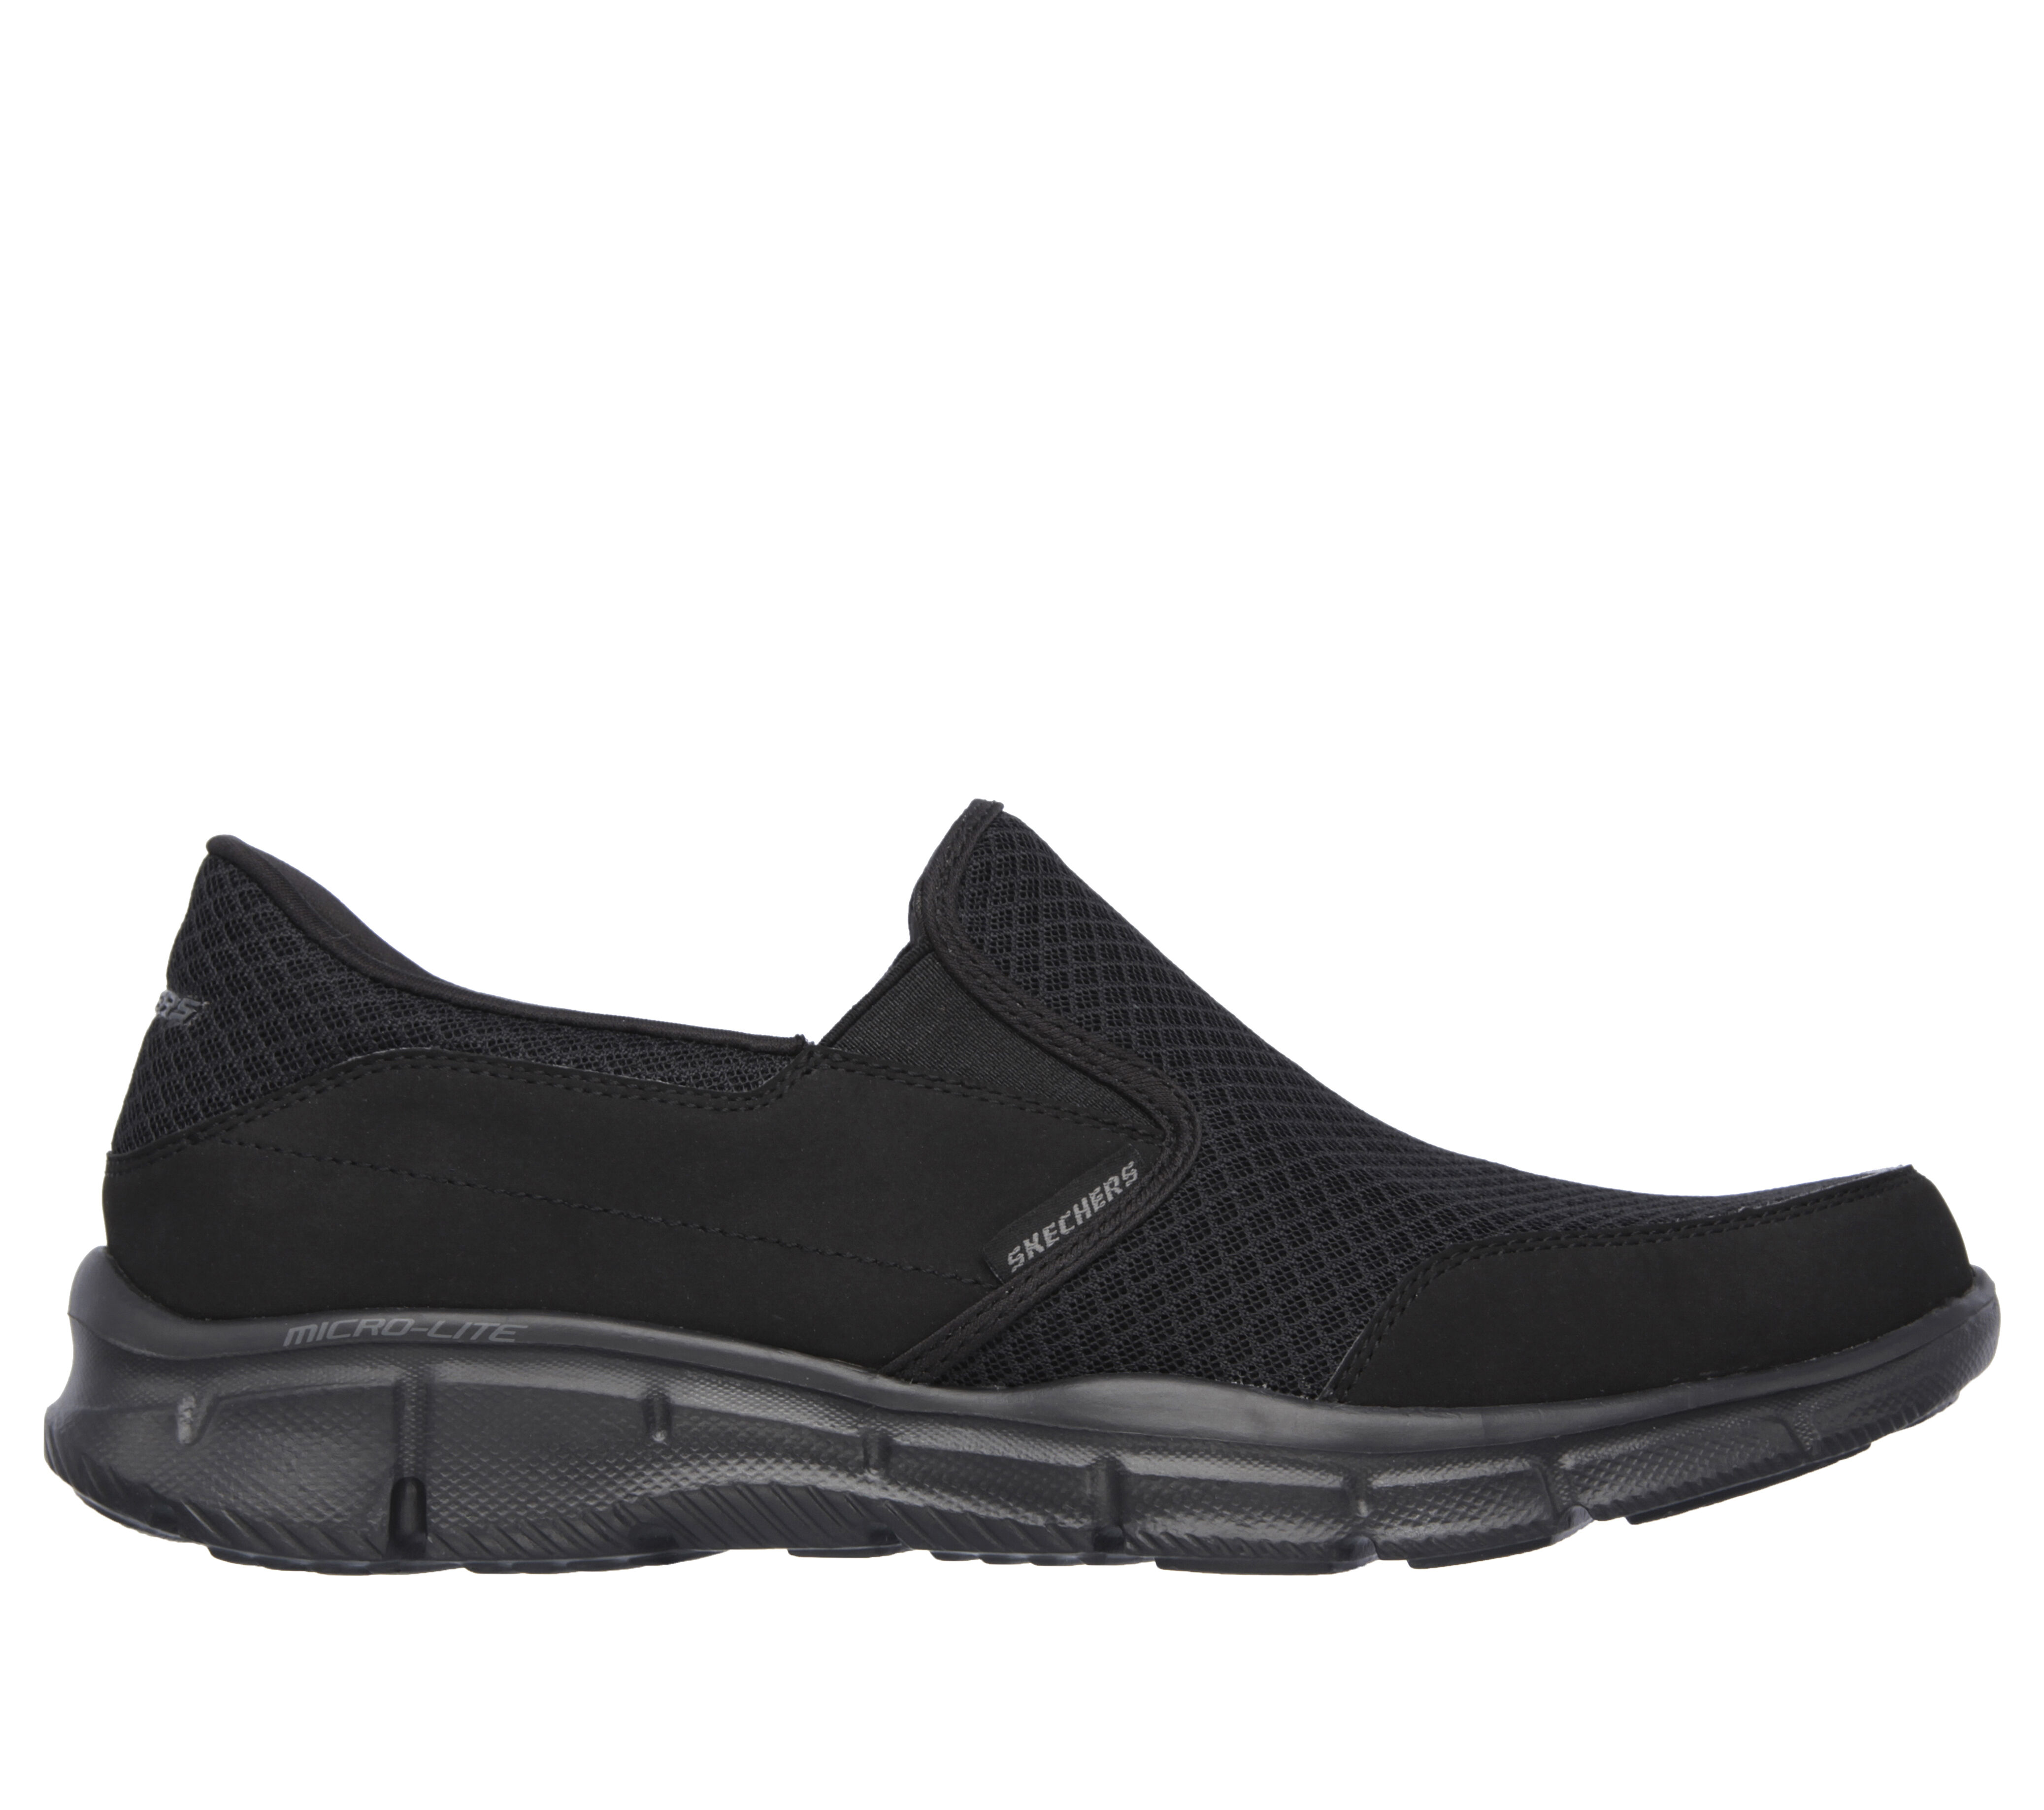 skechers casual dress shoes